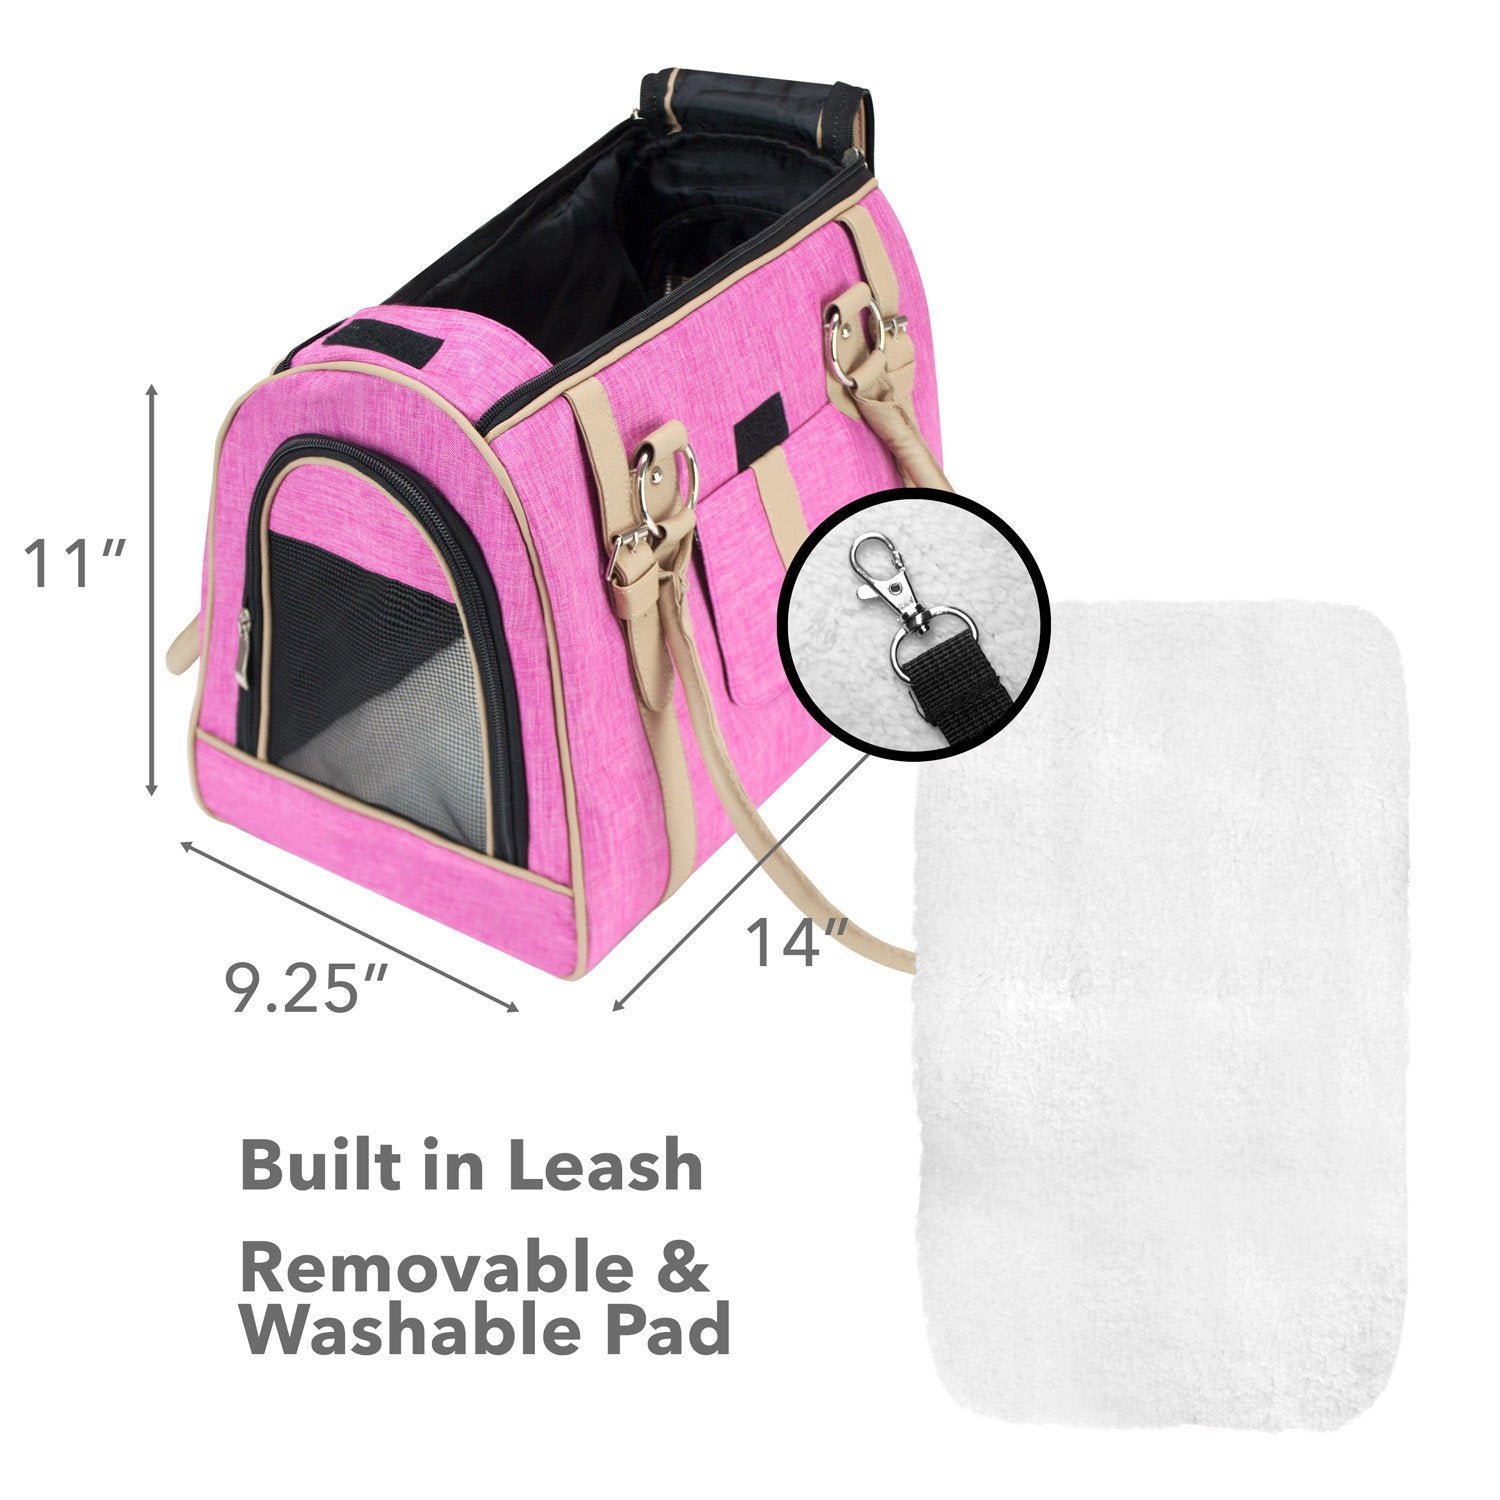 Paws & Pals Airline Approved Pet Carriers - Soft Sided Kennel, Pink